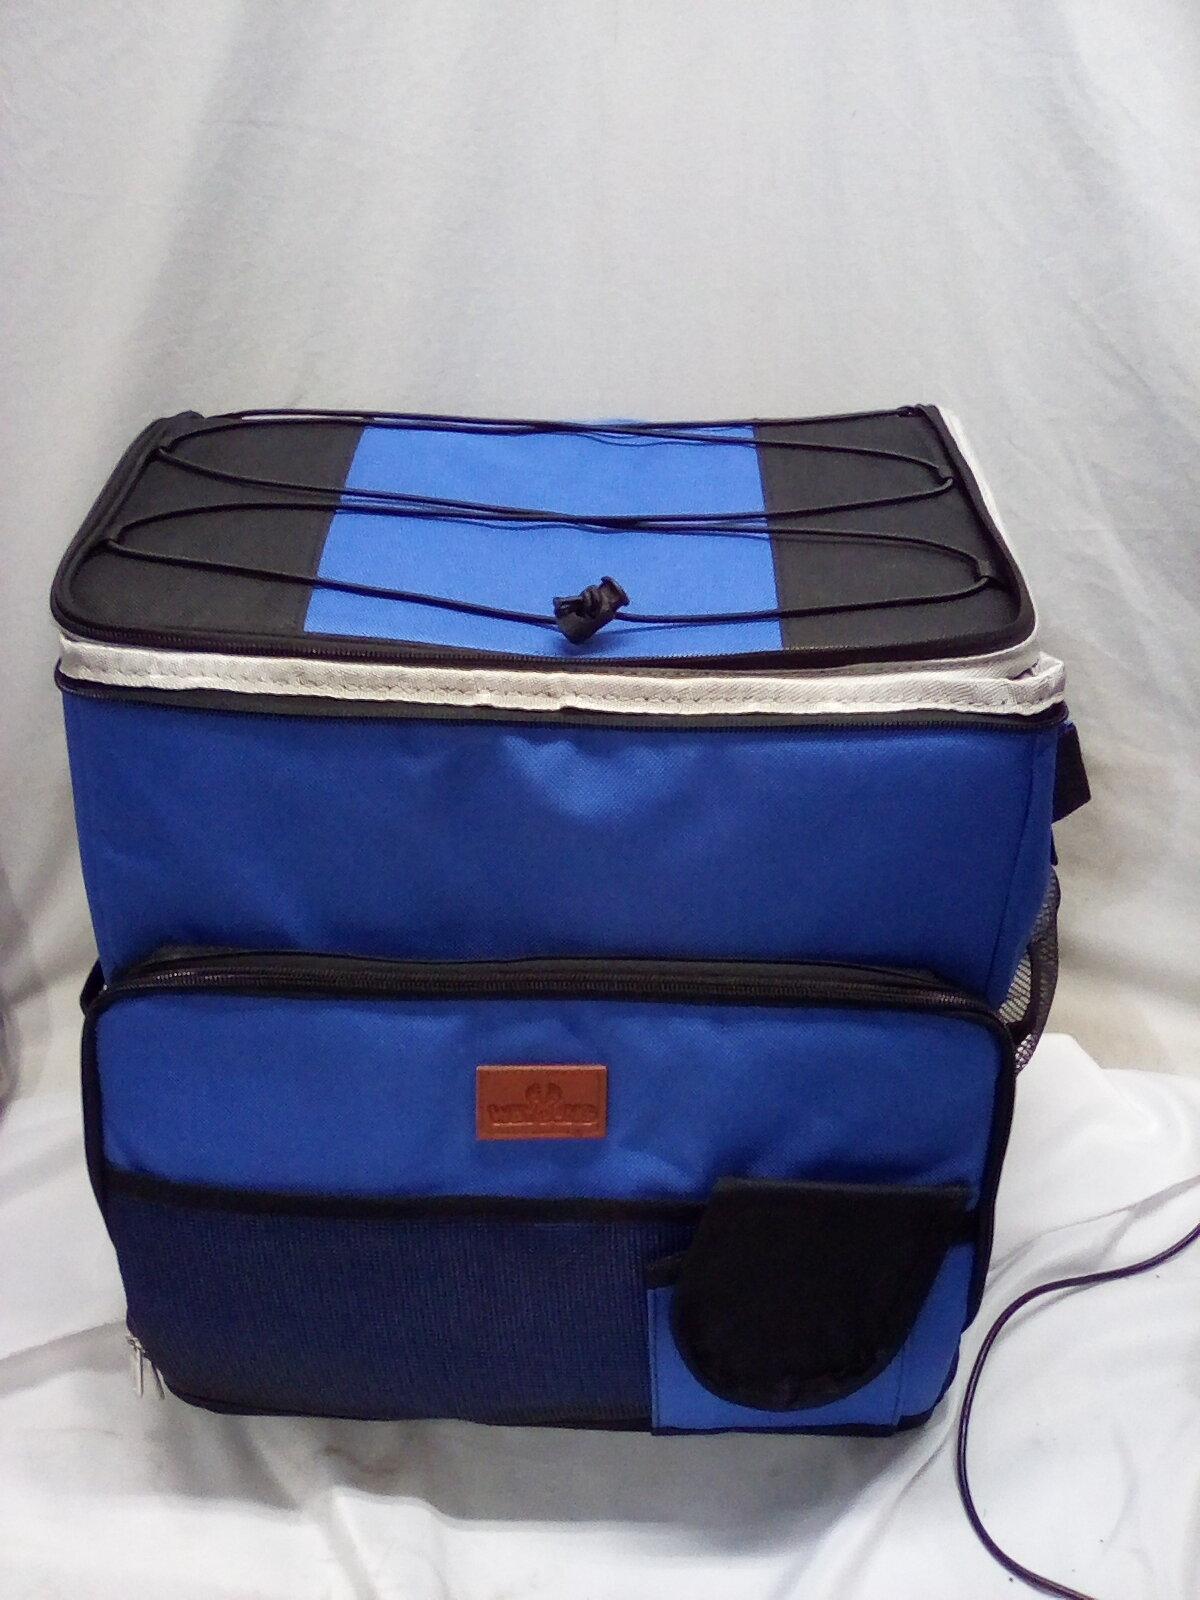 Weyoung Insulated Cooler.